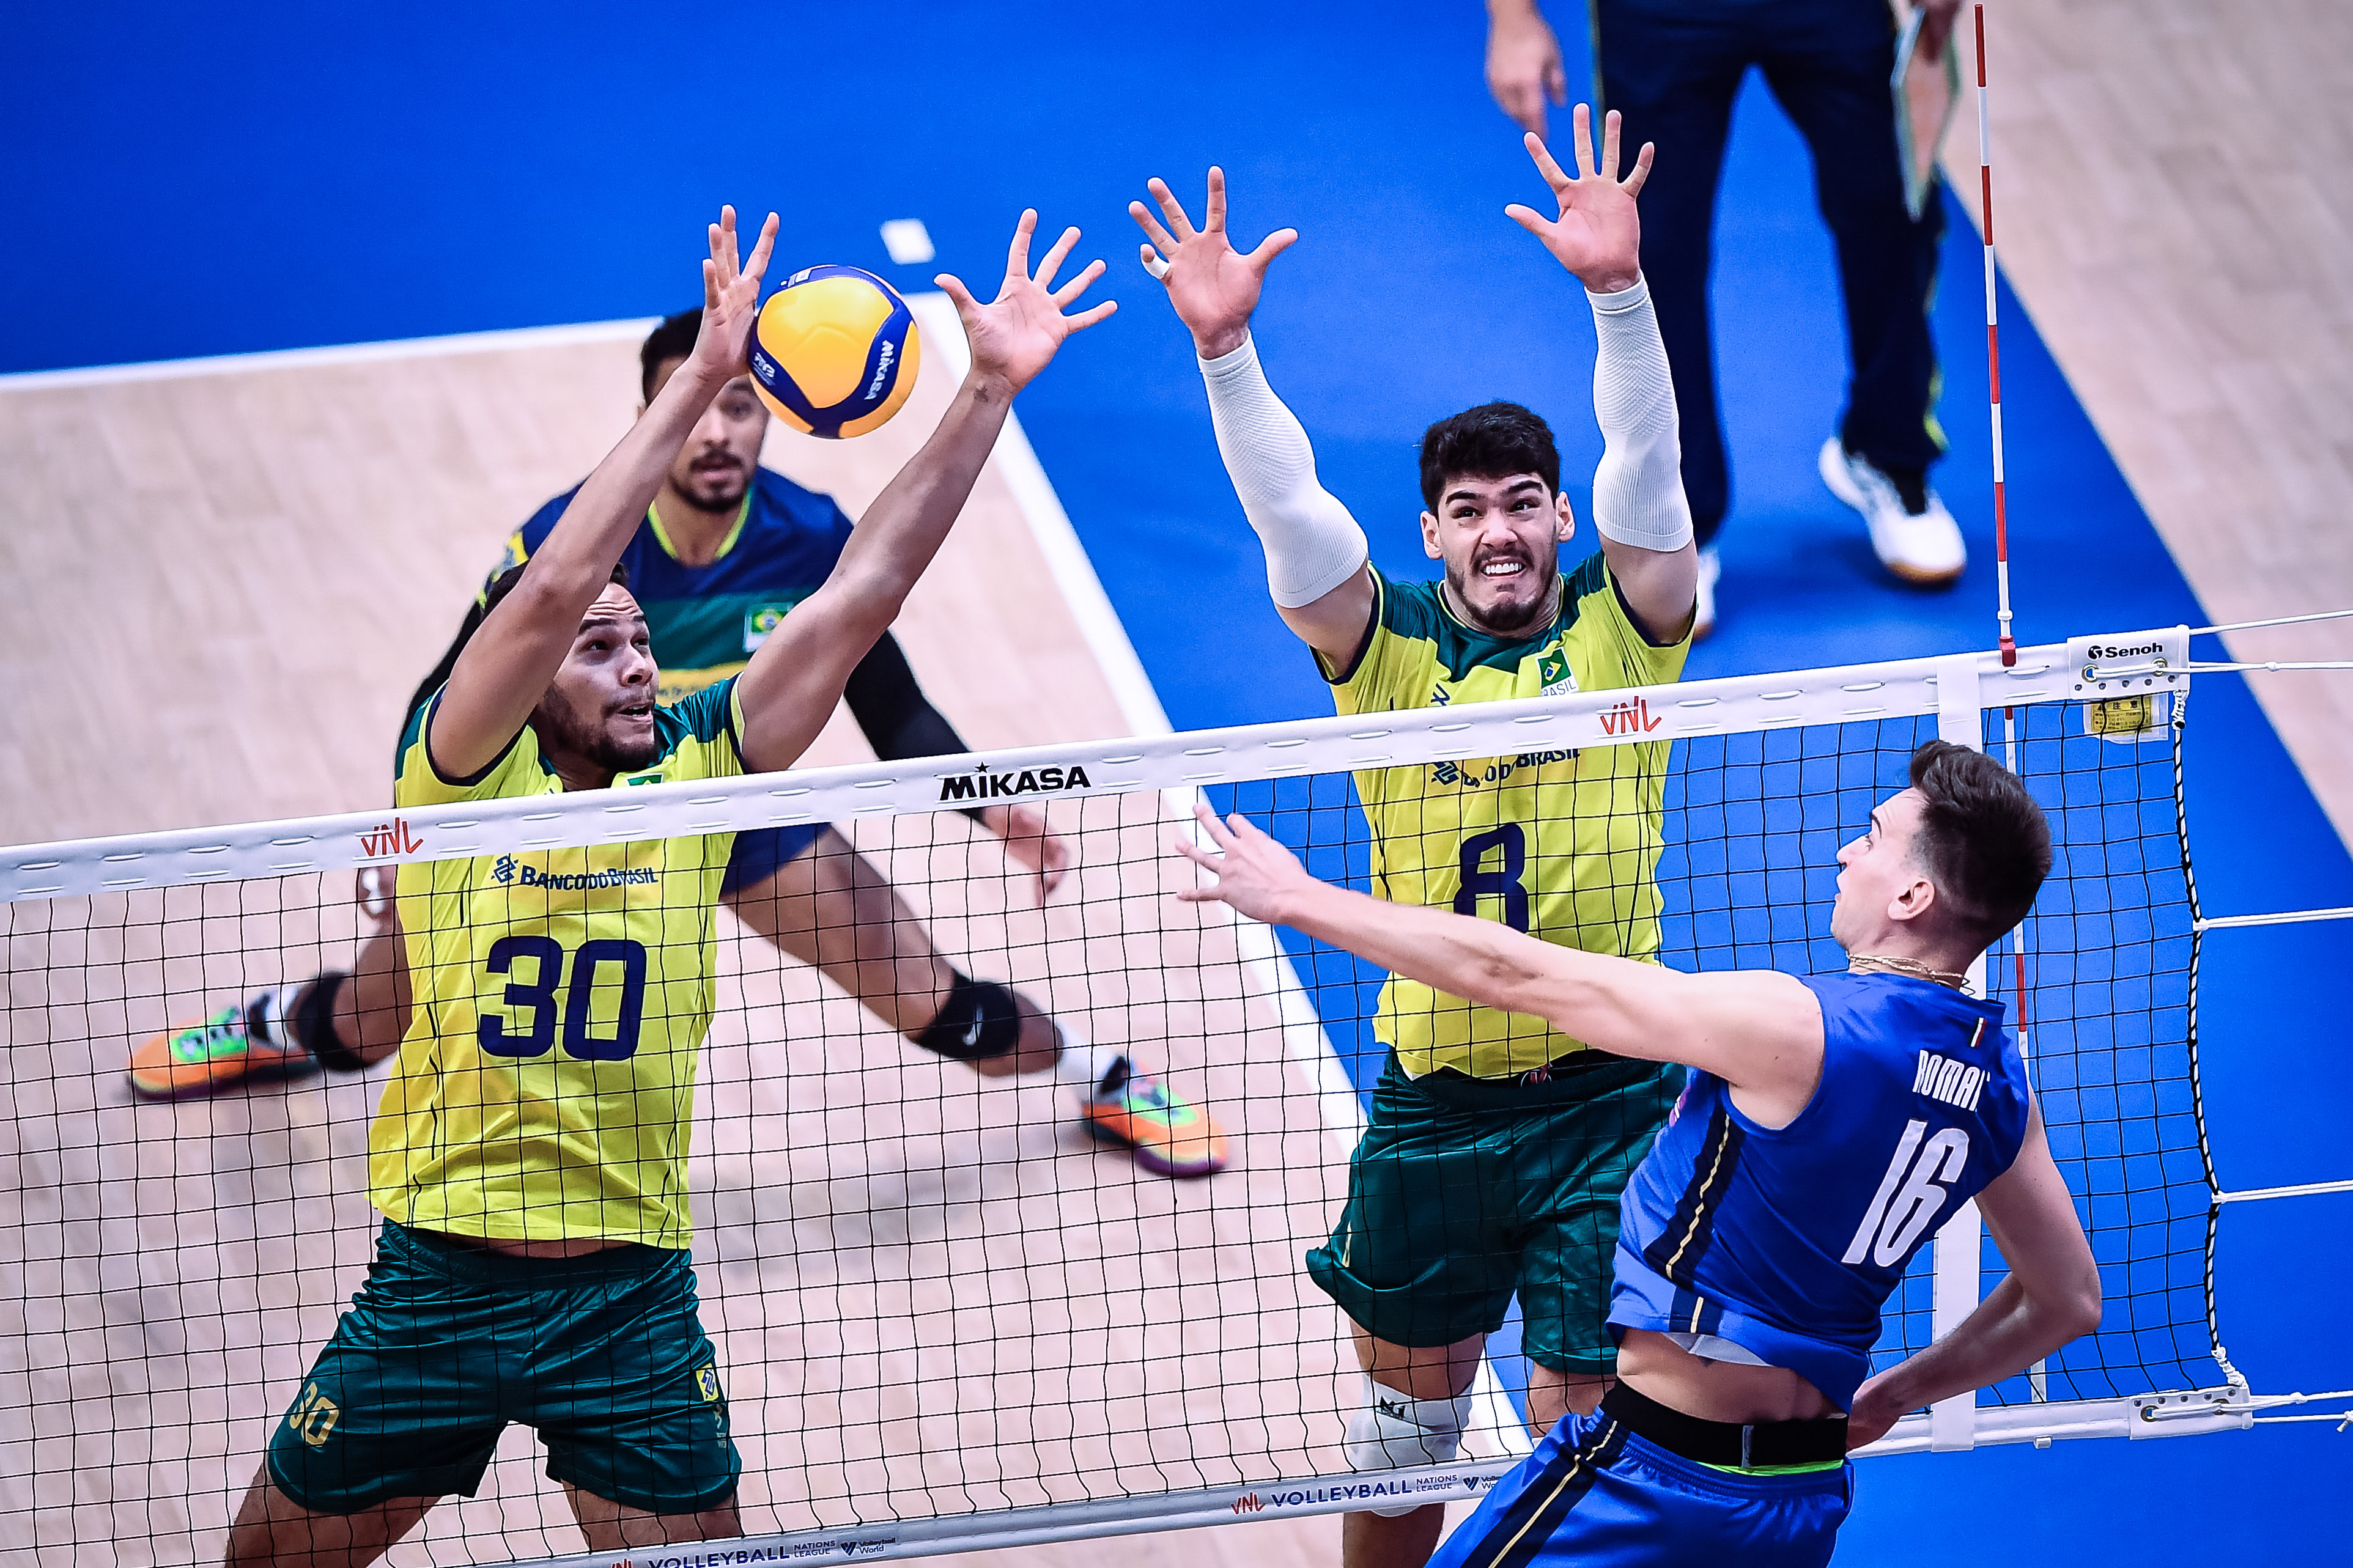 Brazil and Italy determined to avoid upsets in Rio volleyballworld